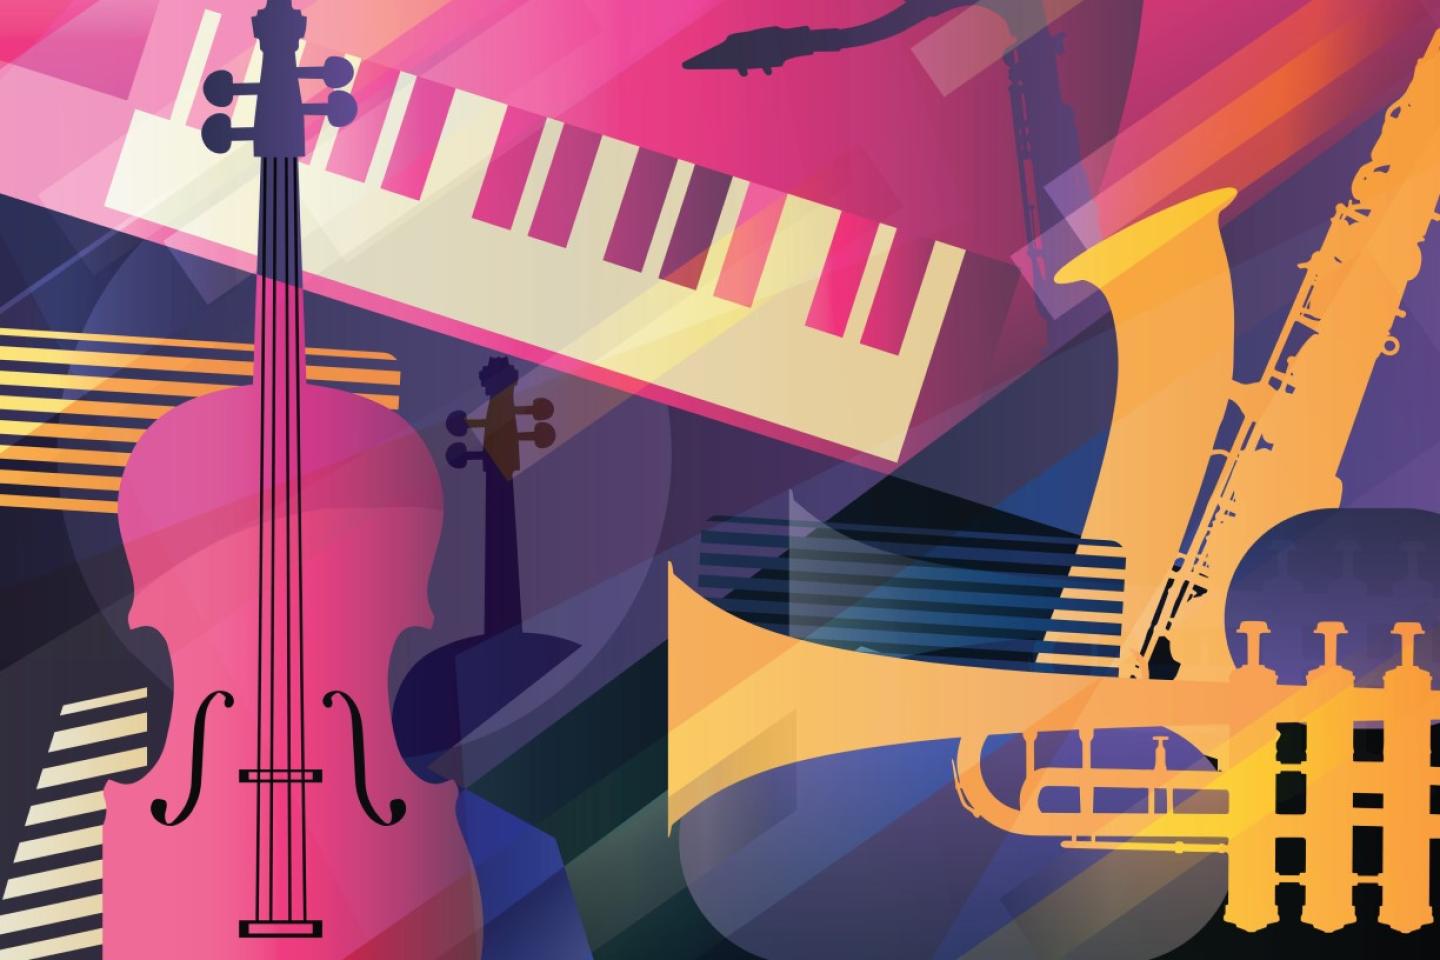 Illustration of brightly colored musical instruments, including a saxophone, cello, trumpet and keyboard